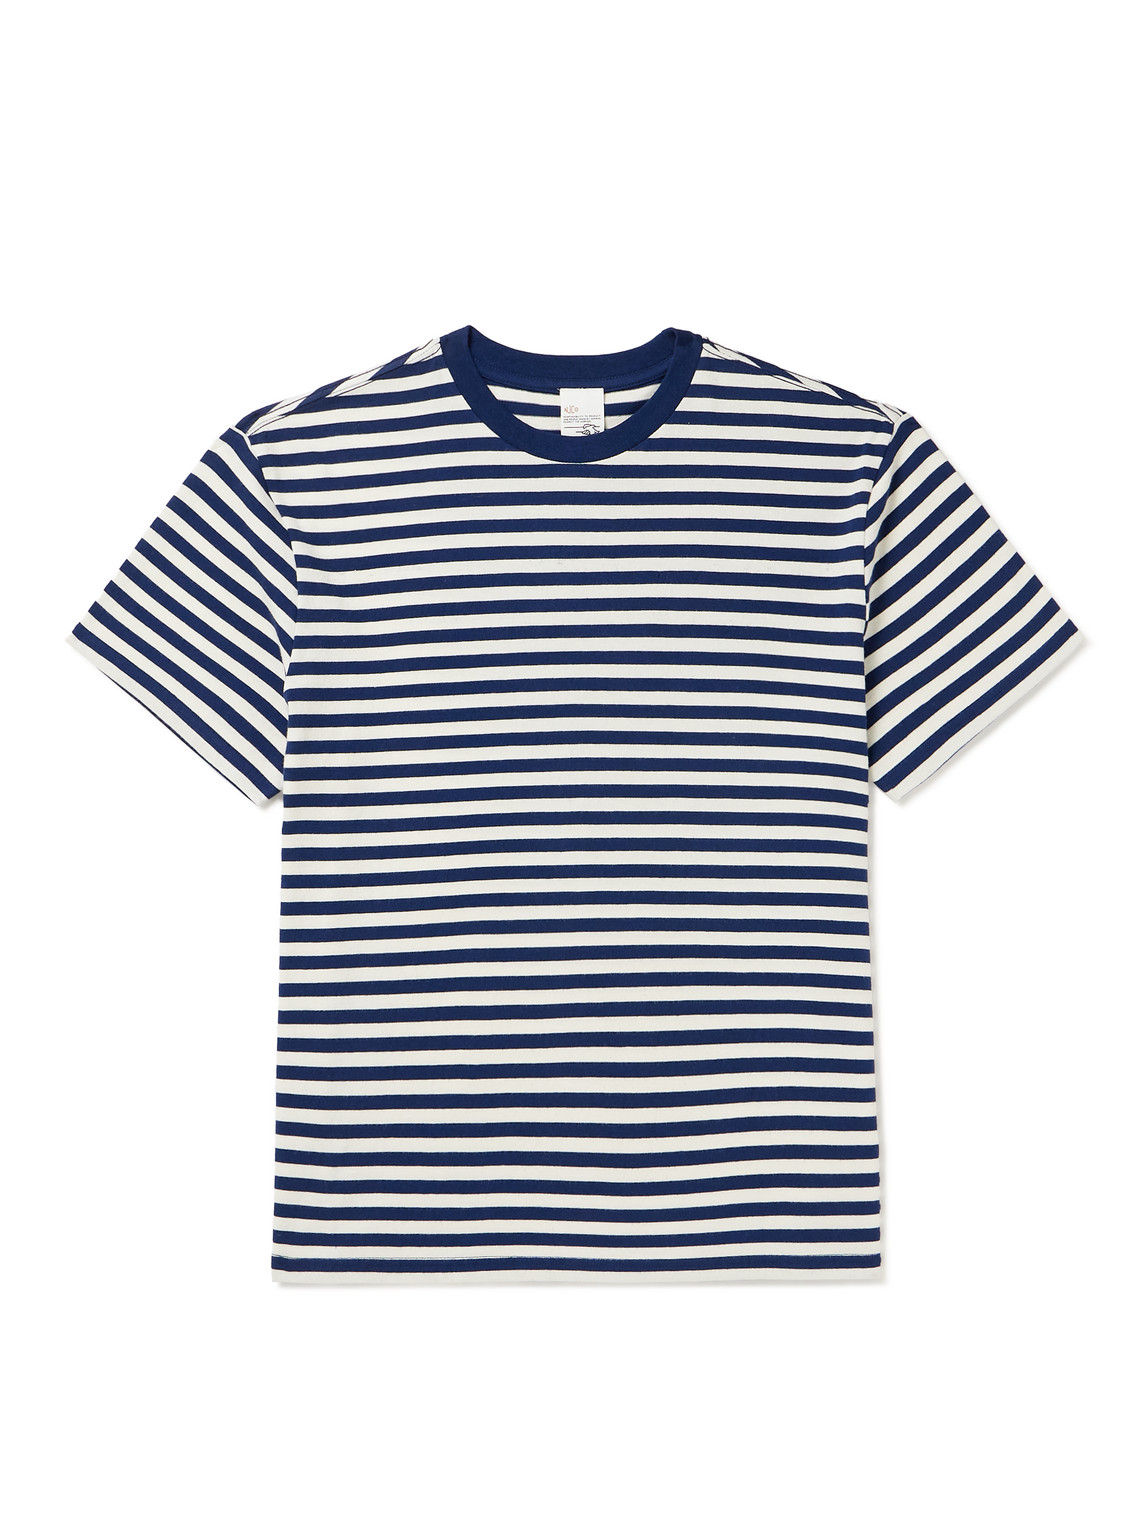 Nudie Jeans Leffe Striped Cotton-jersey T-shirt In Multi